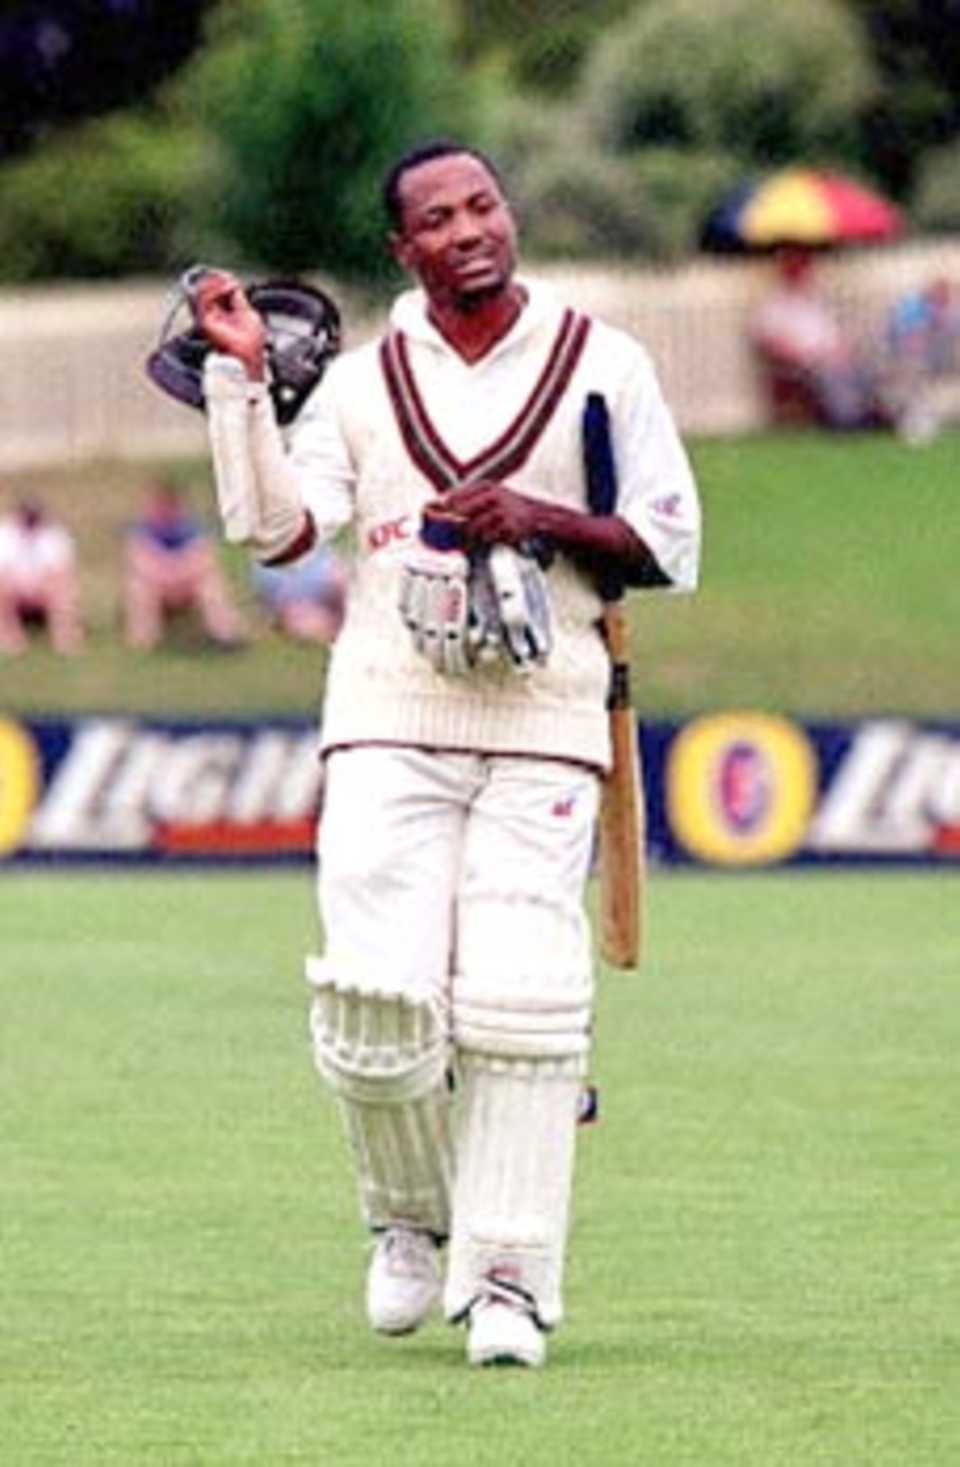 West Indian batman Brian Lara takes his helmet off 11 December 2000, during a match against Australia on the third day of the West Indies Cricket Tour at Bellerive Oval, Hobart. Lara has been nursing a hamstring injury that is defying specialists' prediction of an early cure.